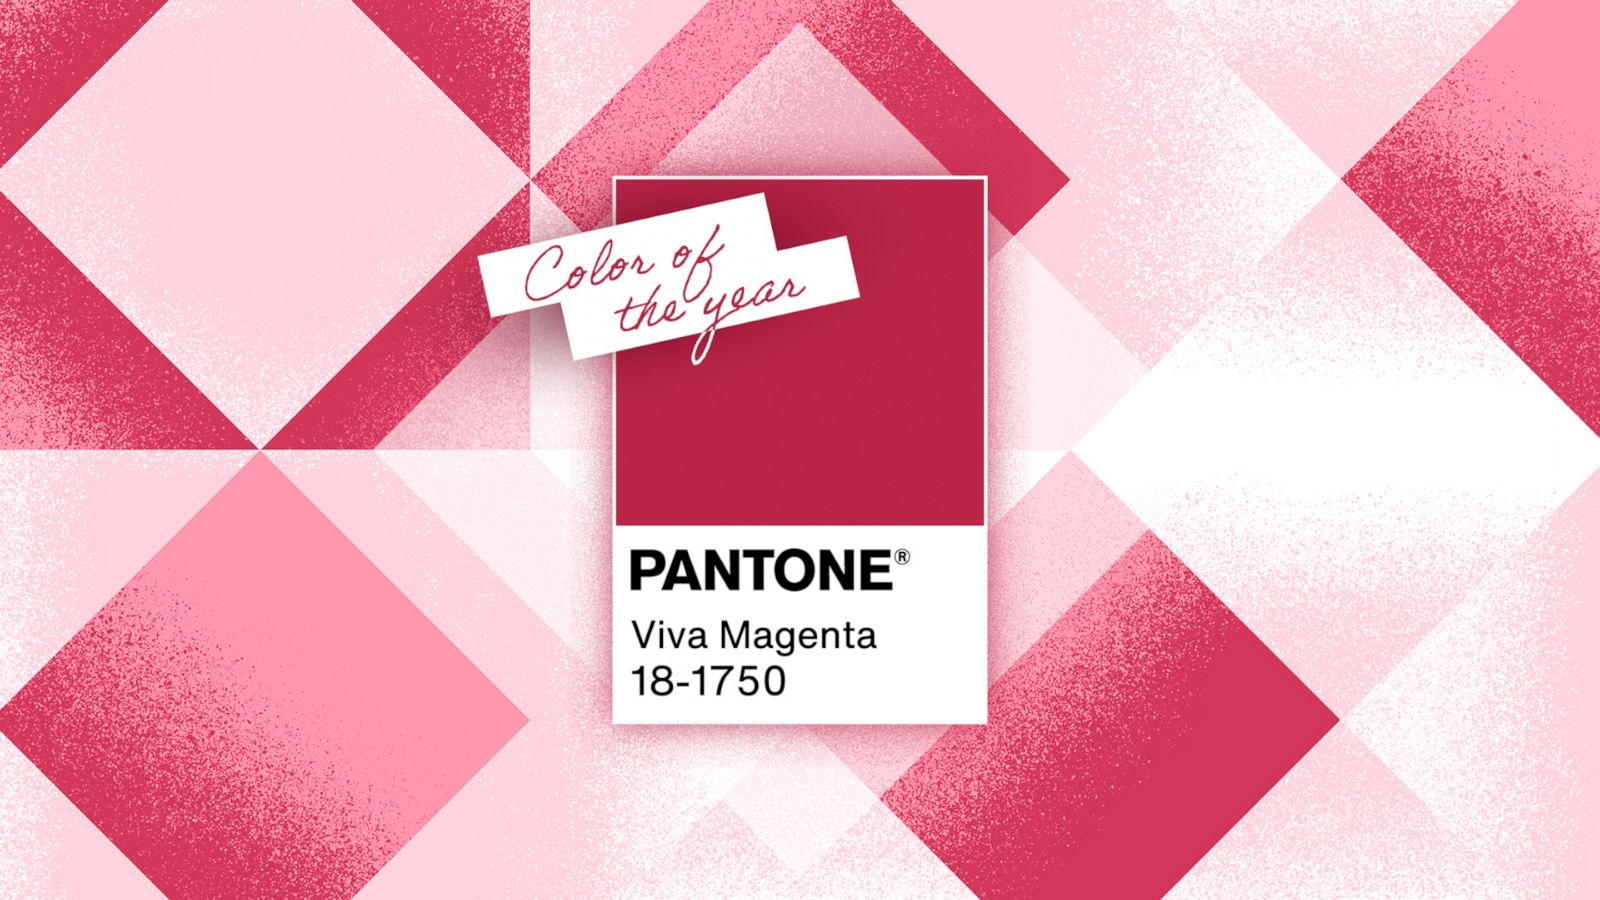 Pantone's 2023 Color of the Year revealed Morning America